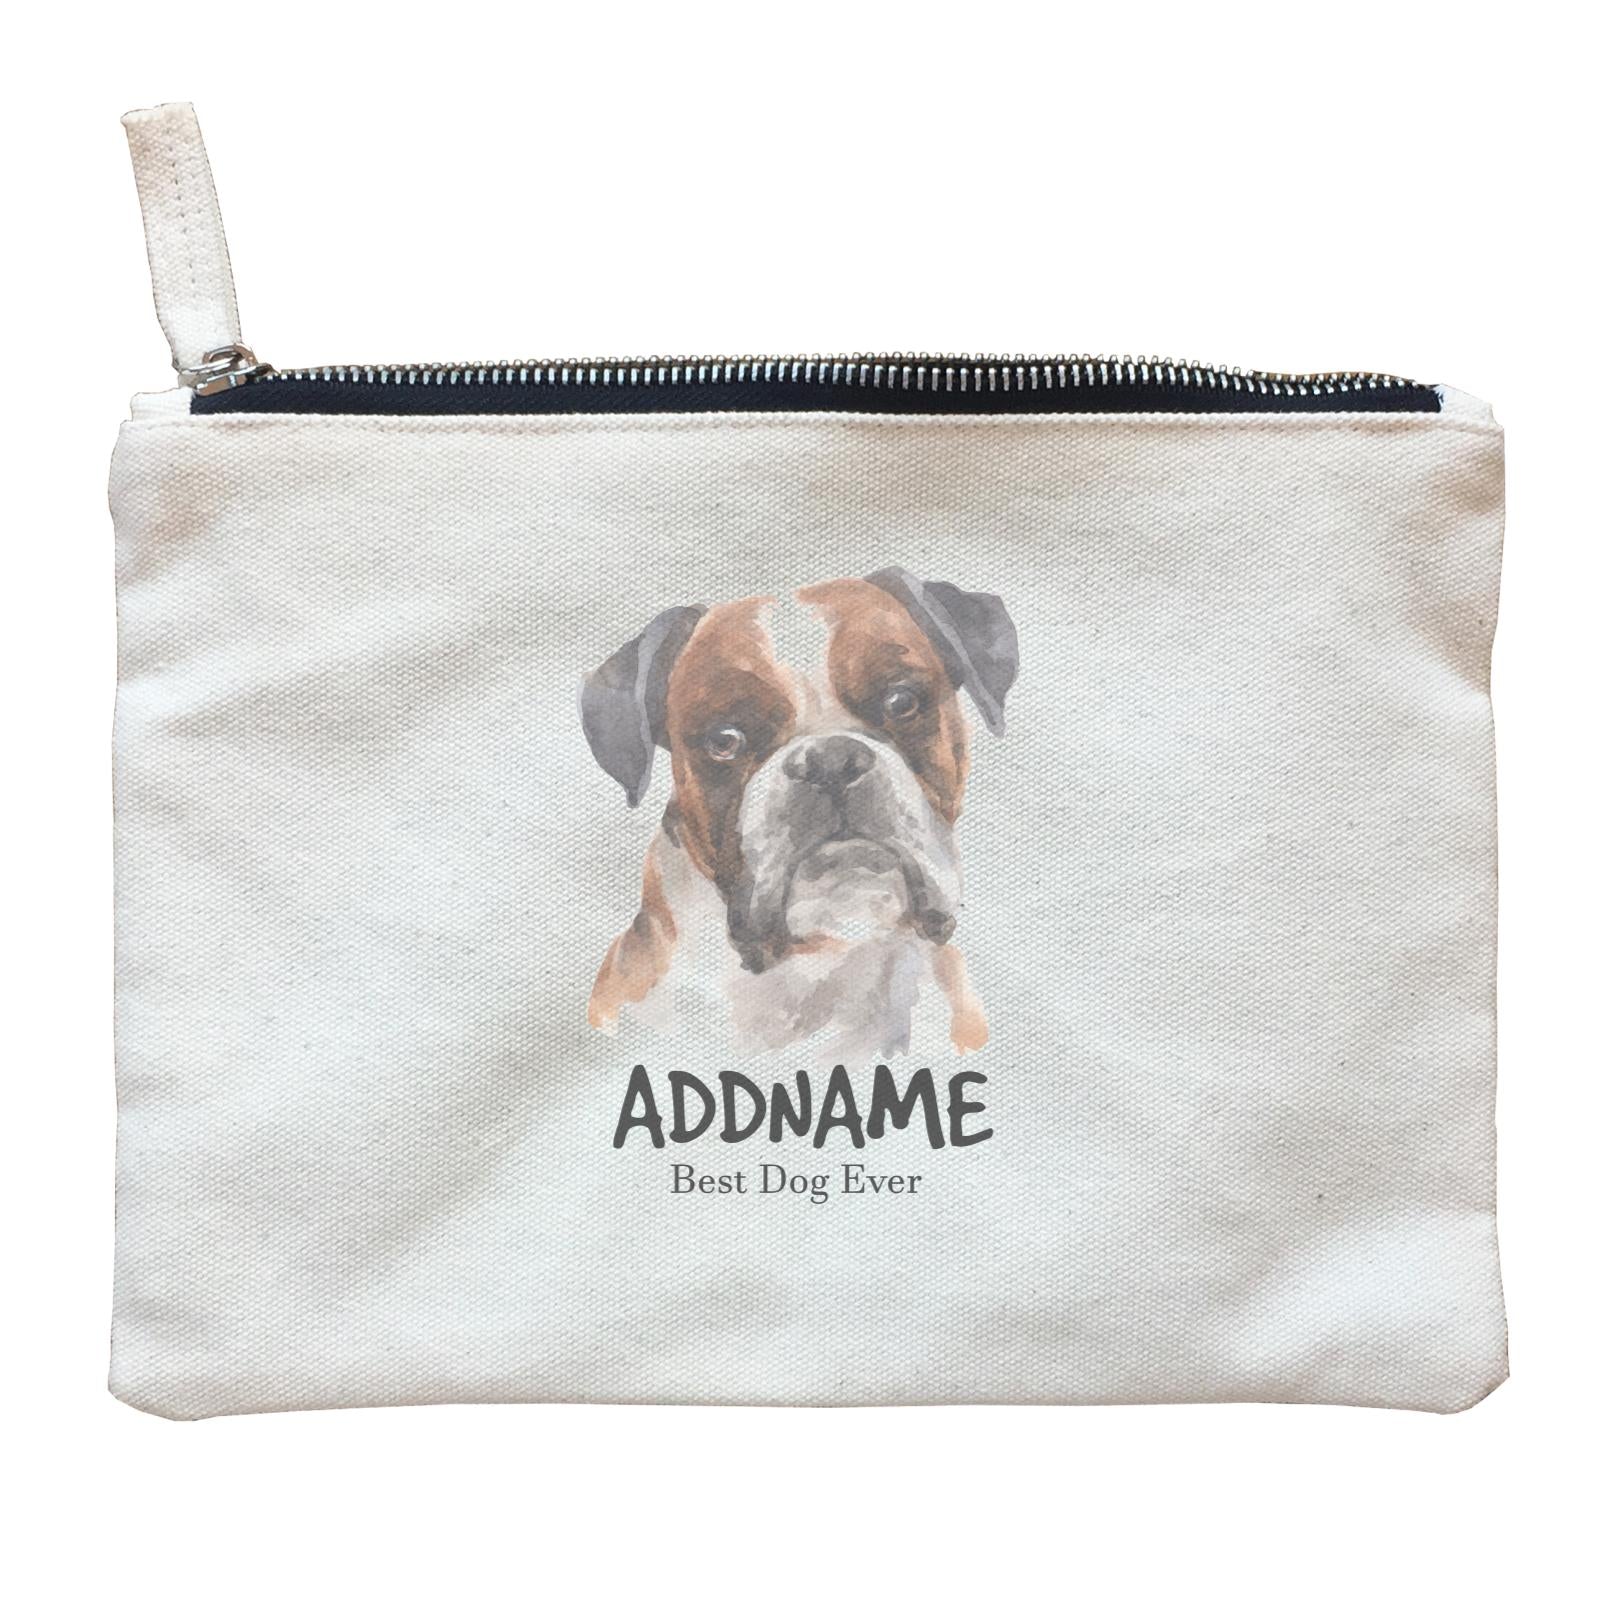 Watercolor Dog Boxer Black Ears Best Dog Ever Addname Zipper Pouch